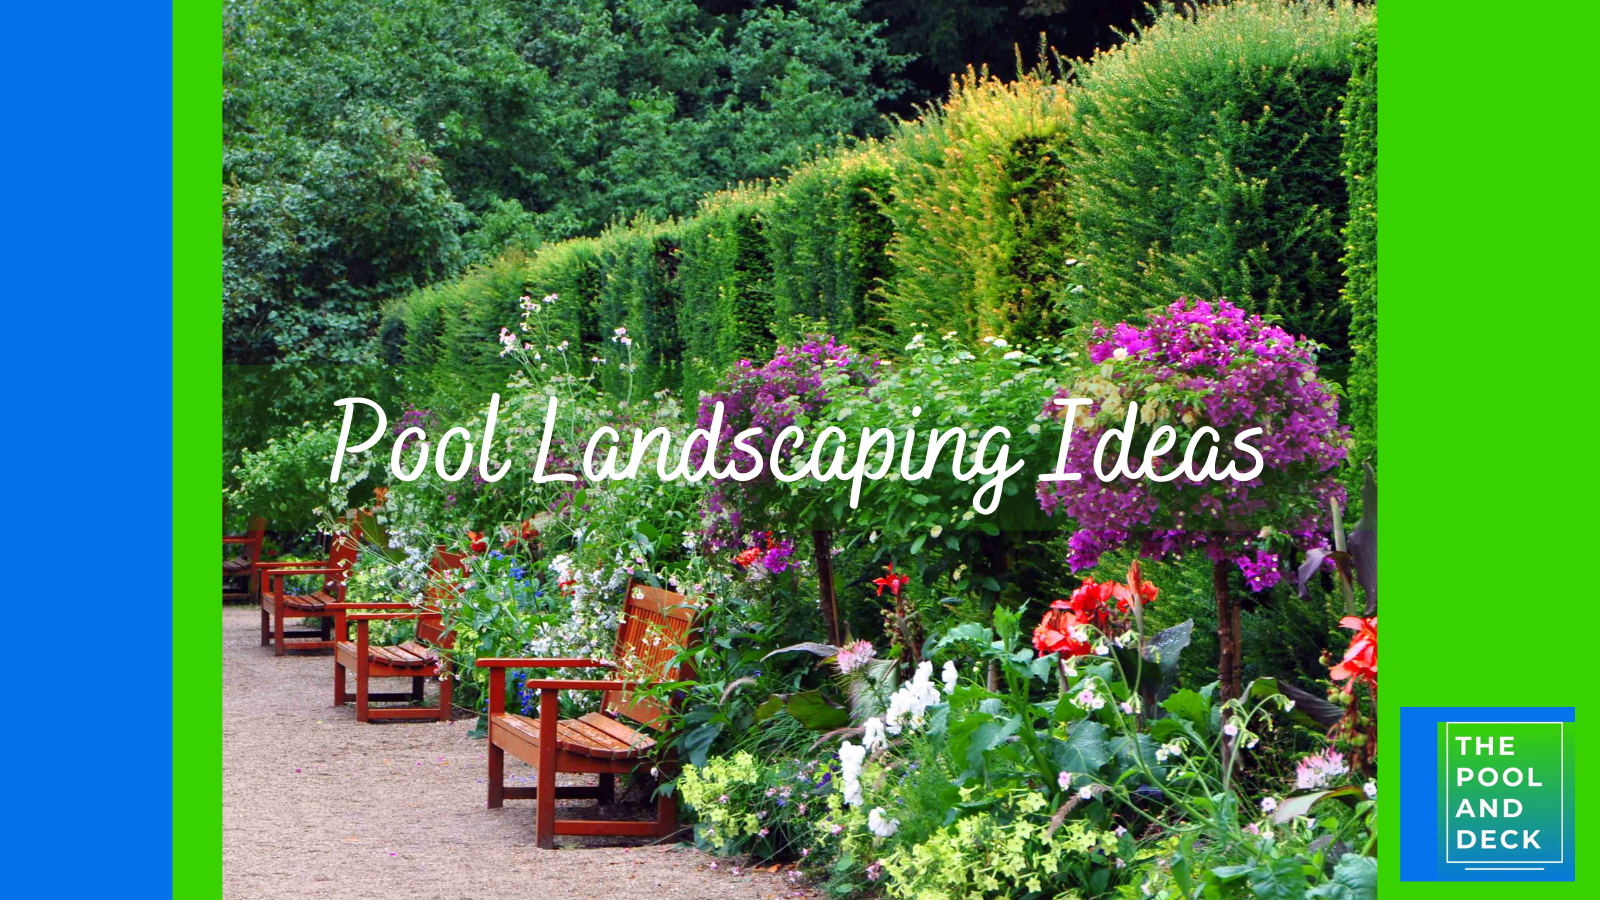 11 Pool Landscaping Ideas That Are Simple & Affordable!